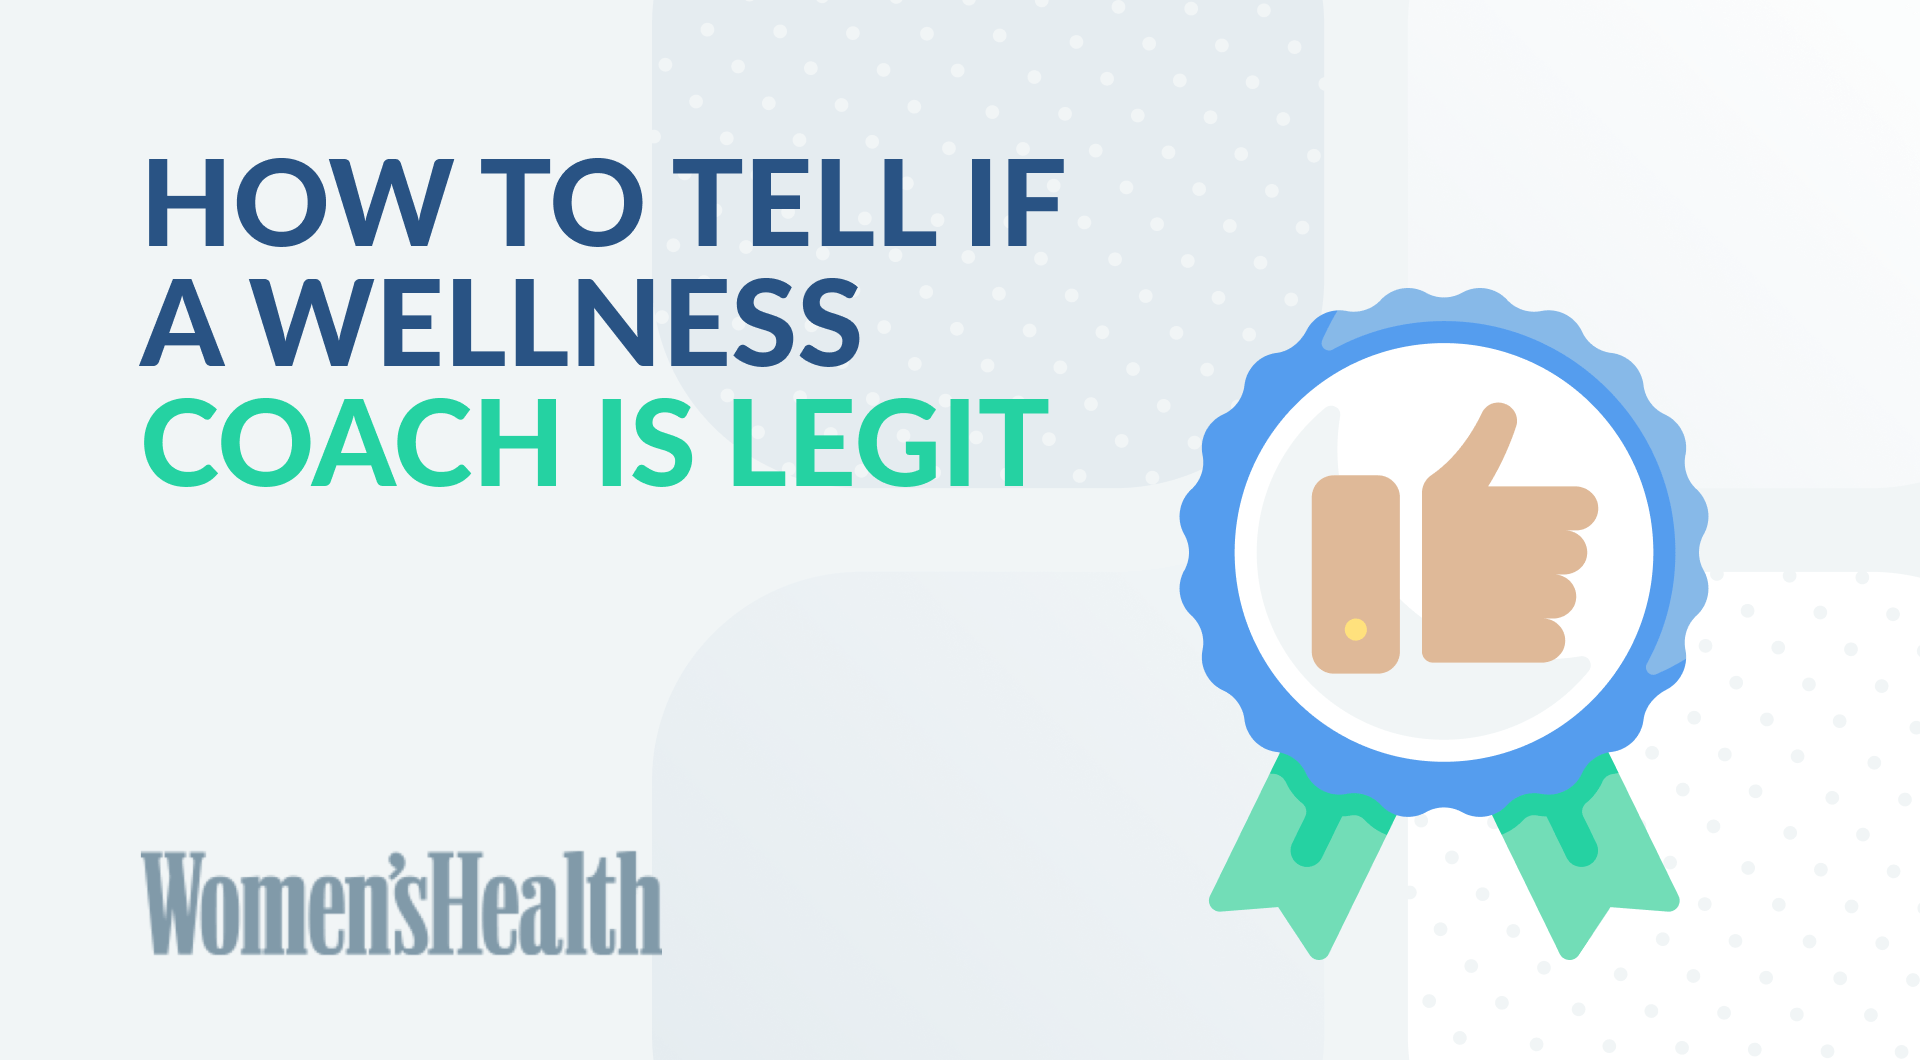 How To Tell If A Wellness Coach Is Legit